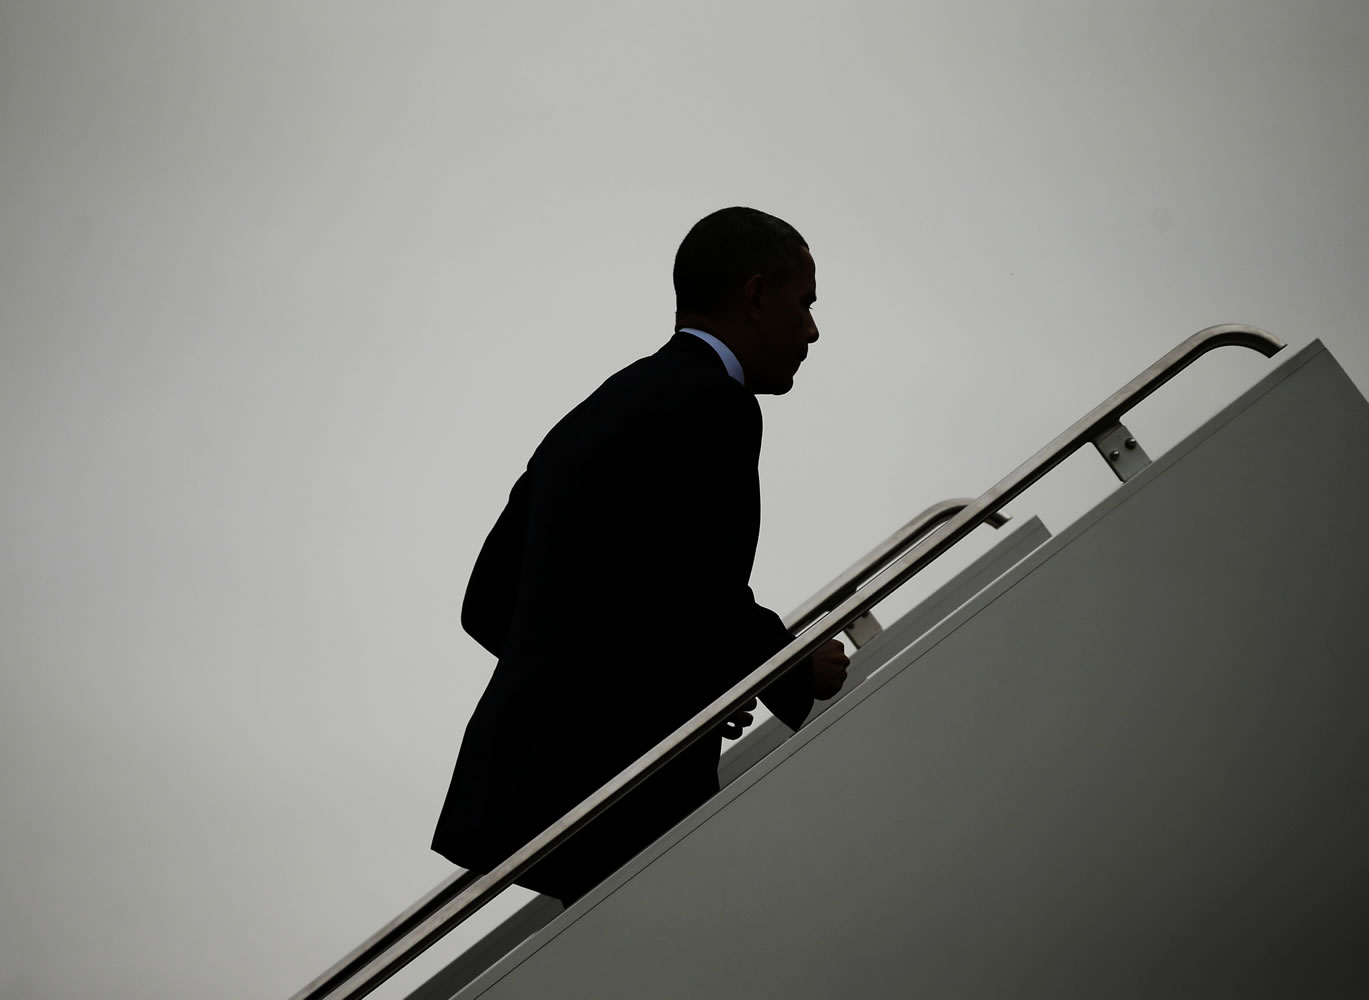 President Barack Obama is seen silhouetted as he walks up the stairs to board Air Force One before his departure from Andrews Air Force Base on Thursday.